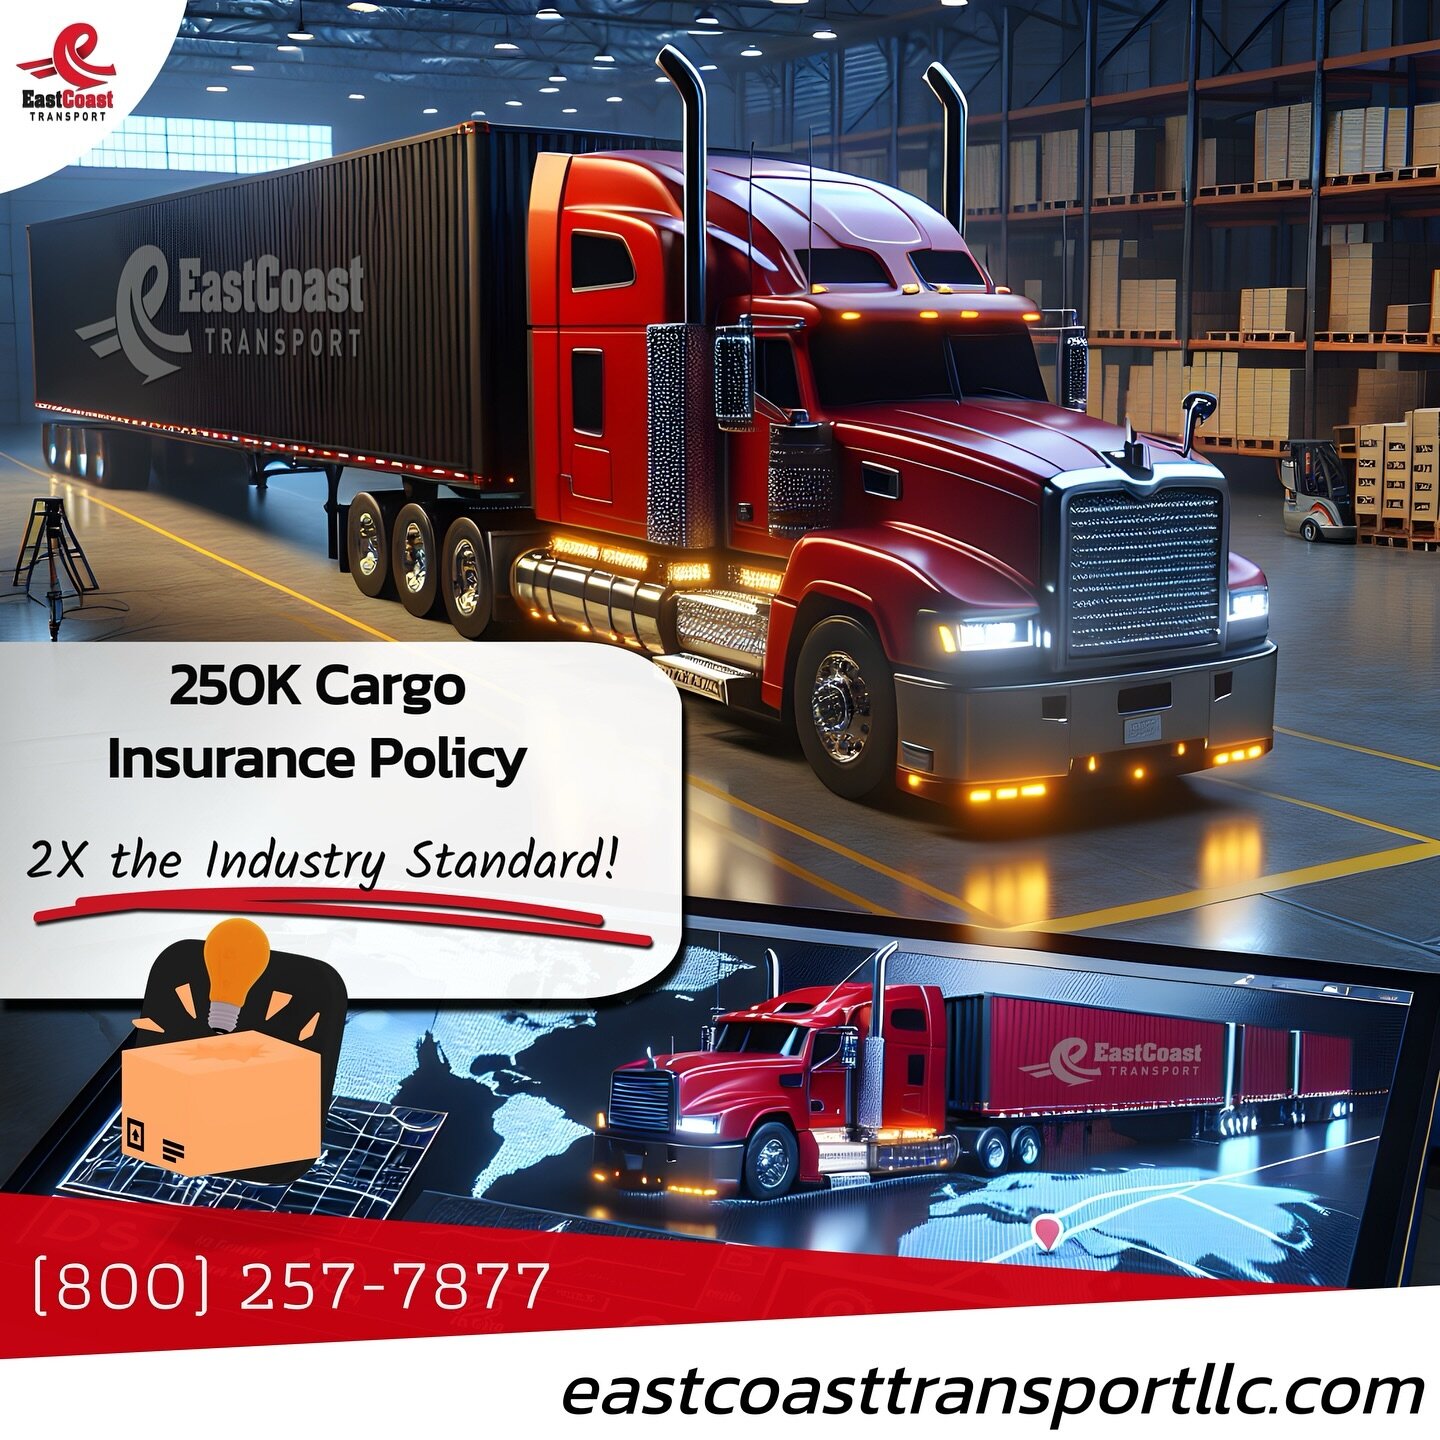 Our Team at East Coast Transport is committed to excellent customer service and satisfaction. 

Leave it to us at ECT &amp; Keep your Peace of Mind with Our 250K Cargo Insurance Policy!

#eastcoasttransport #logistics #3pl #ect3pl #freight #carrier #